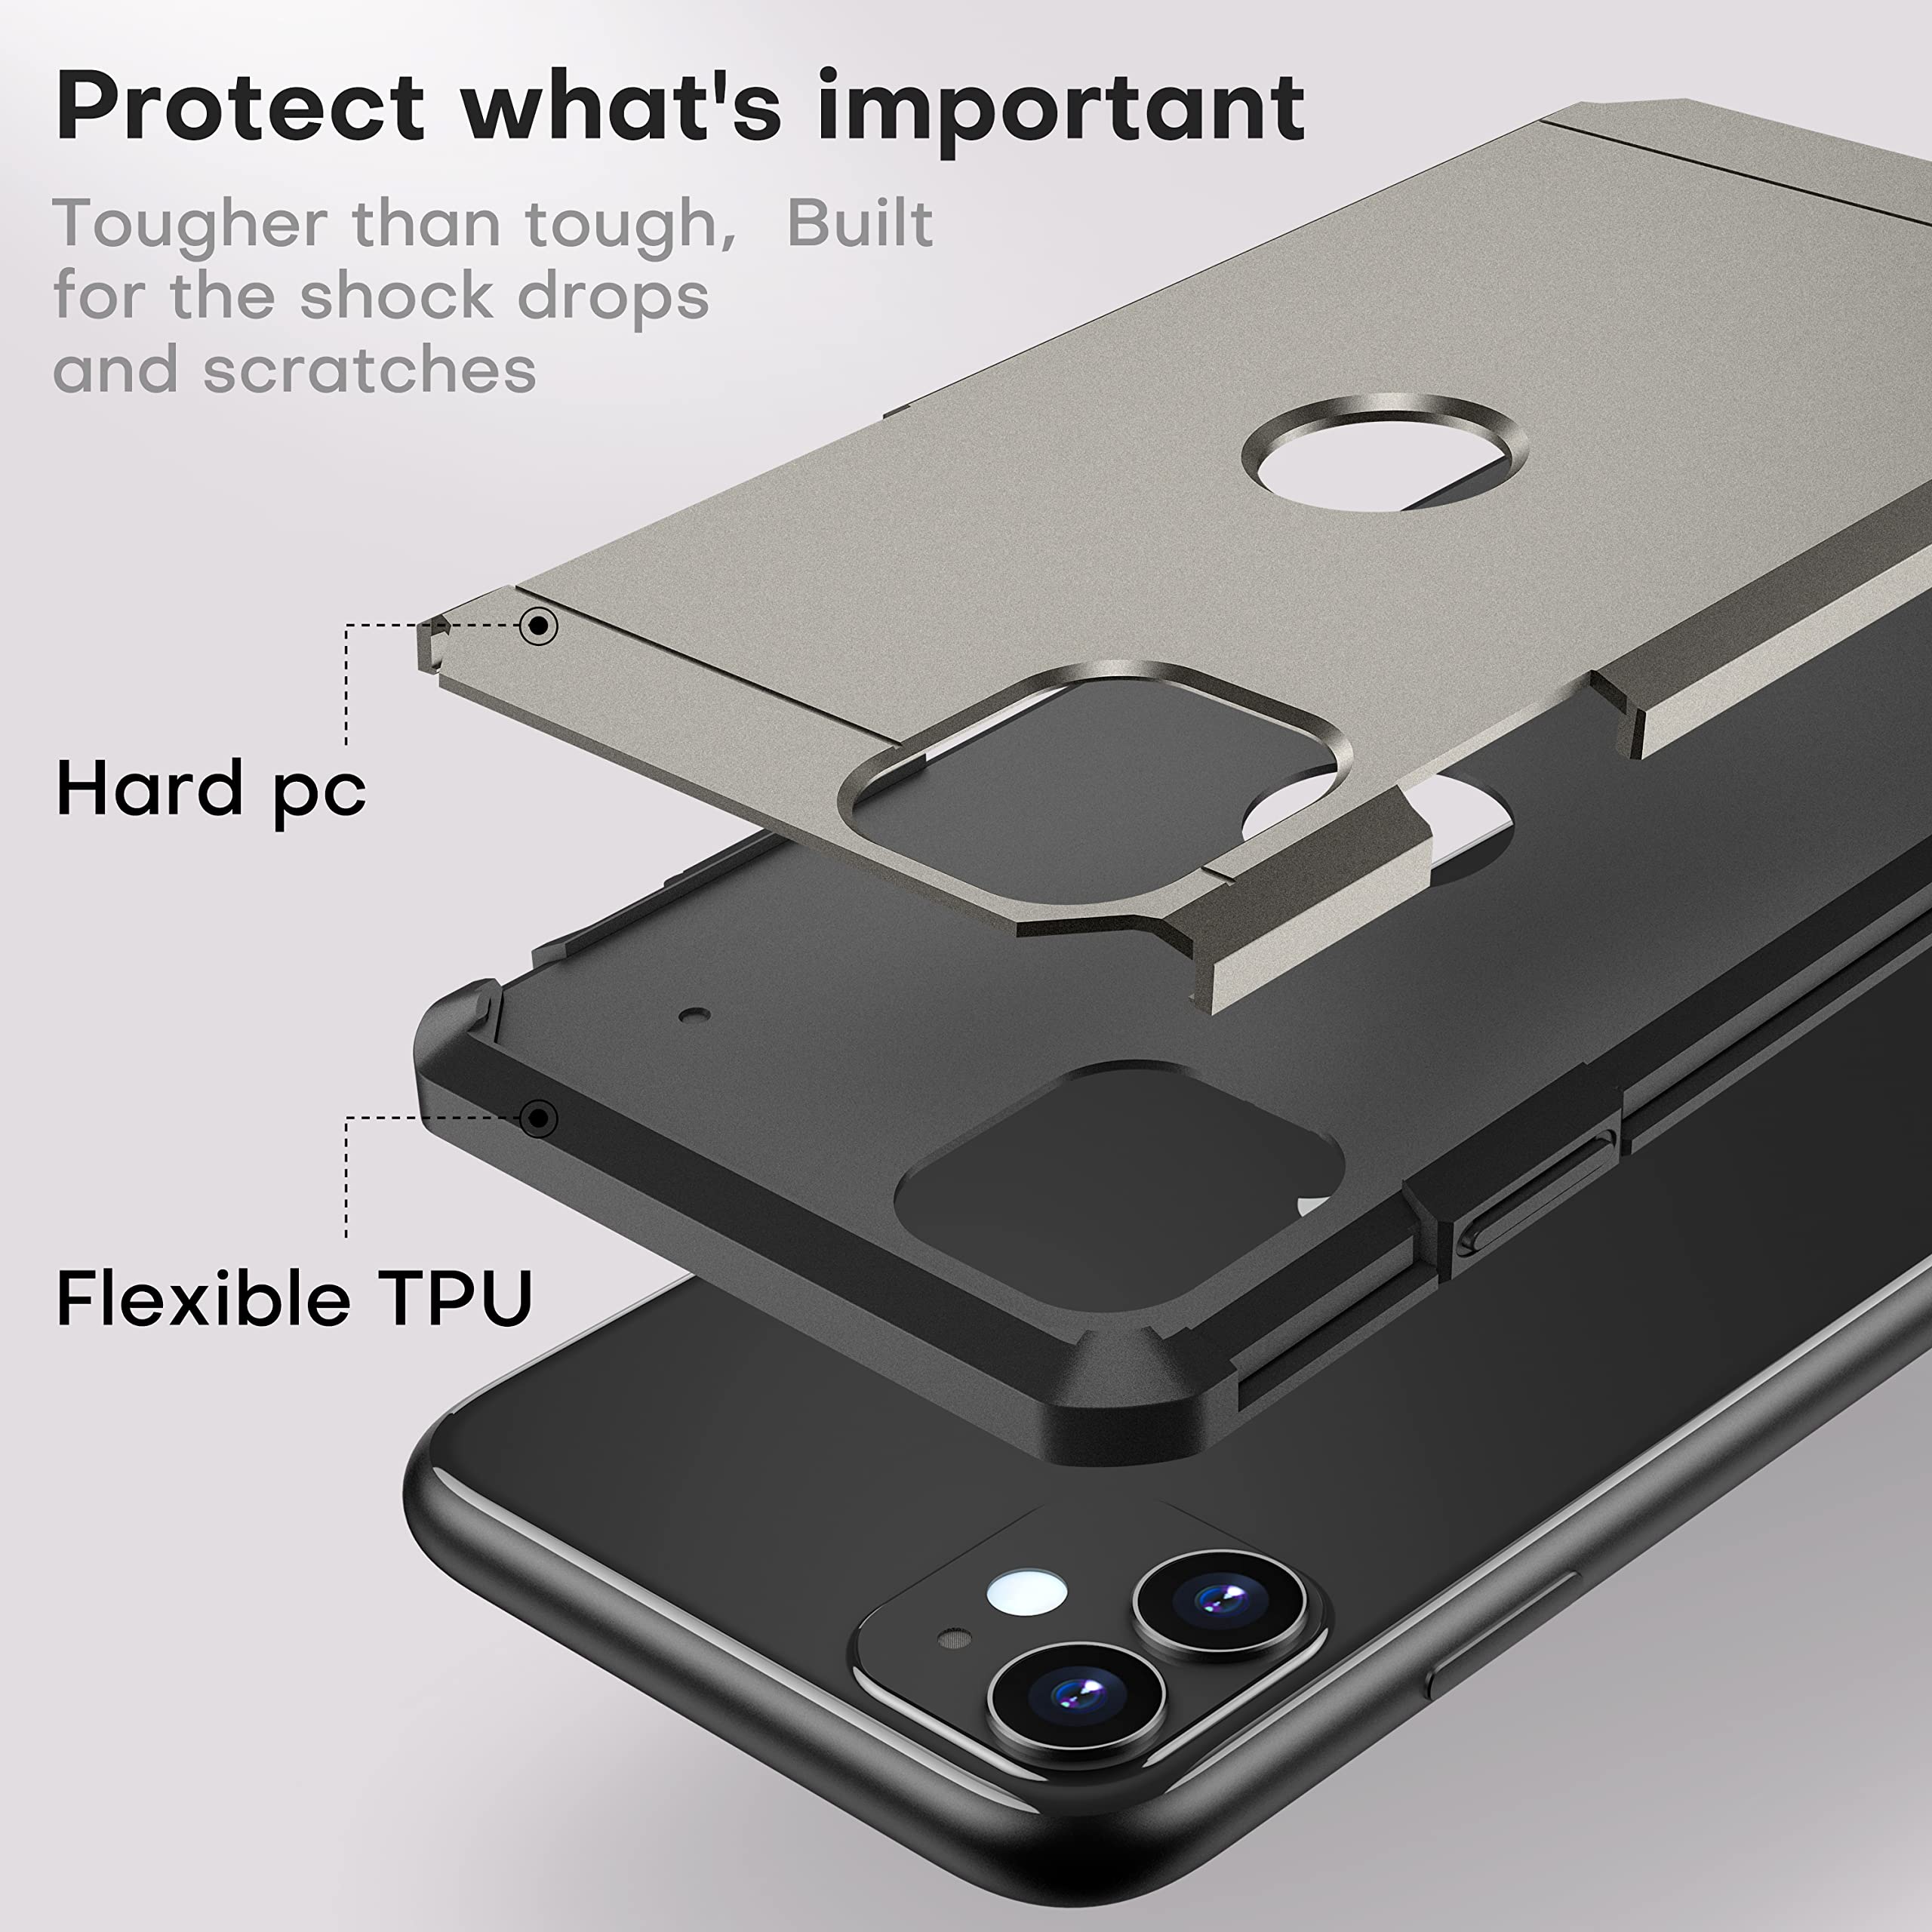 ImpactStrong Compatible with iPhone 11 Case, Heavy Duty Dual Layer Protection Cover Heavy Duty Case Designed for iPhone 11 - Gun Metal